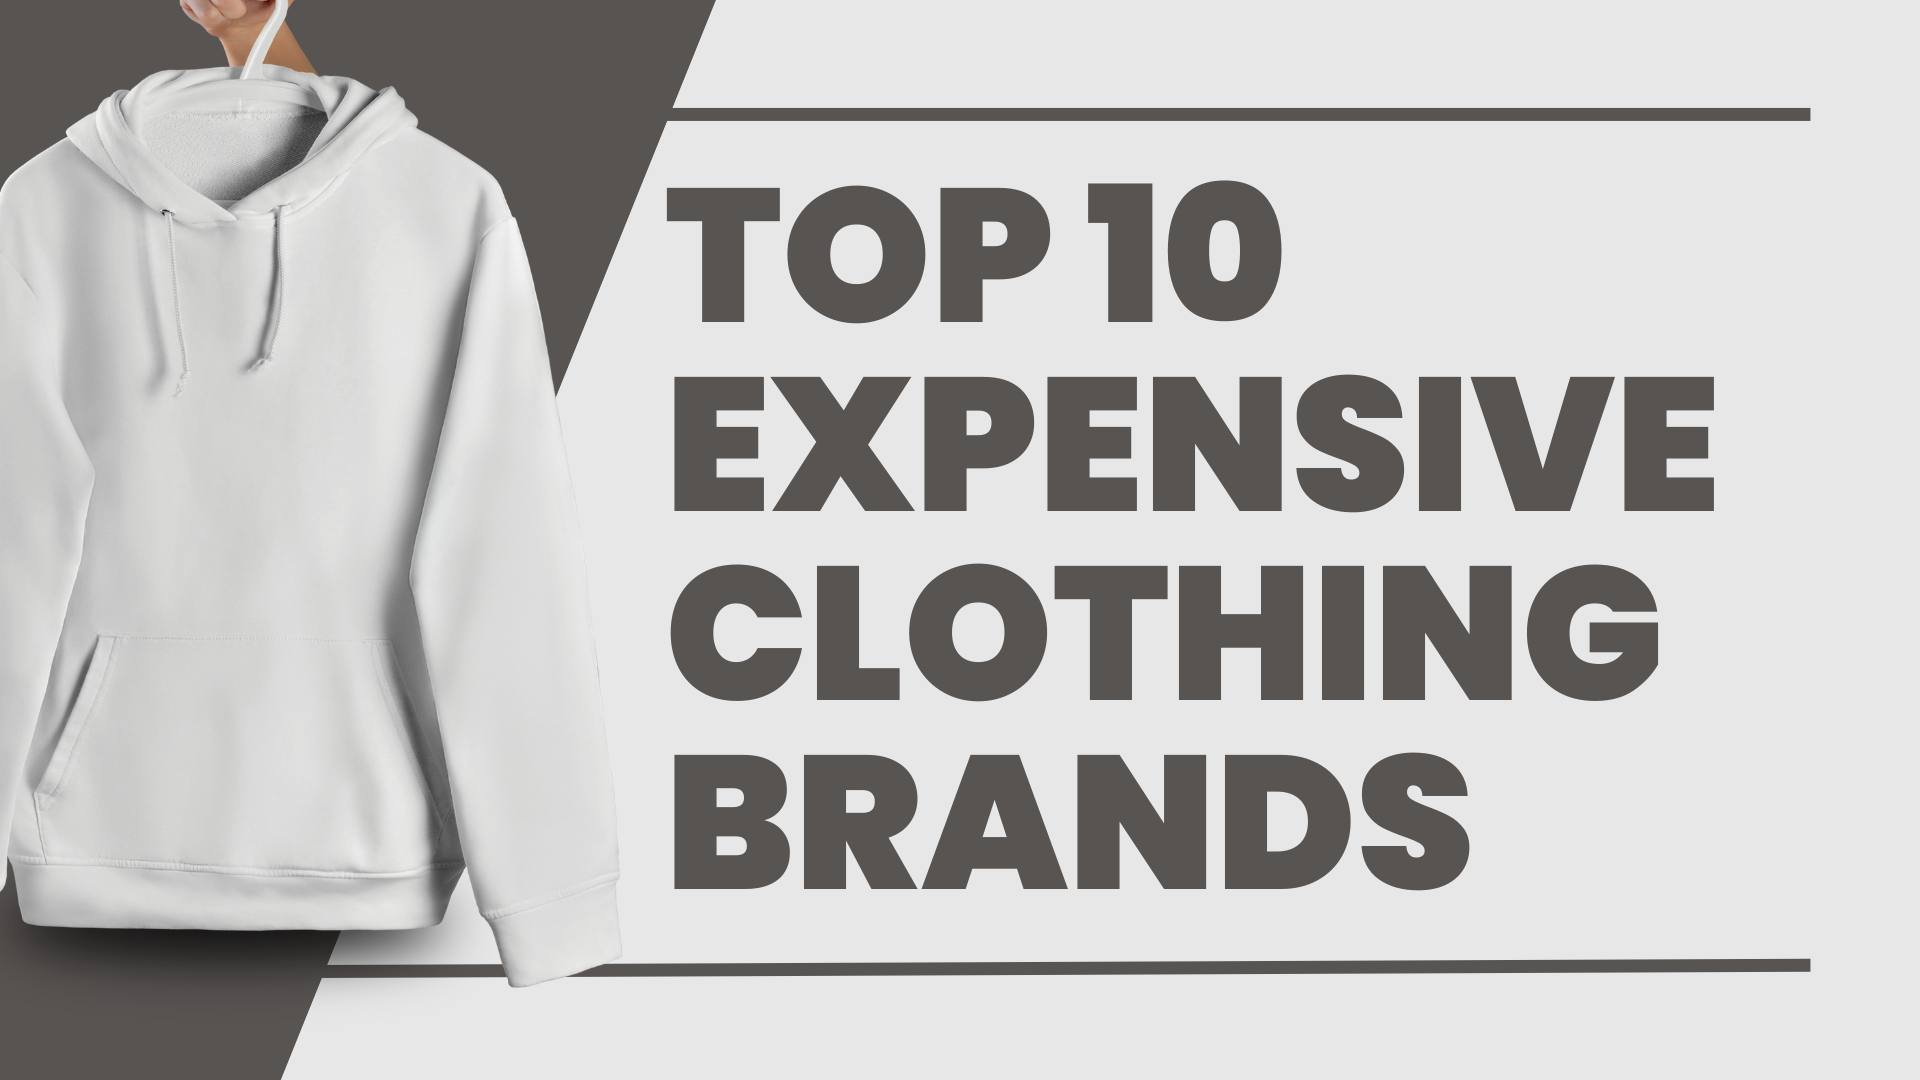 Top 10 Expensive Clothing Brands